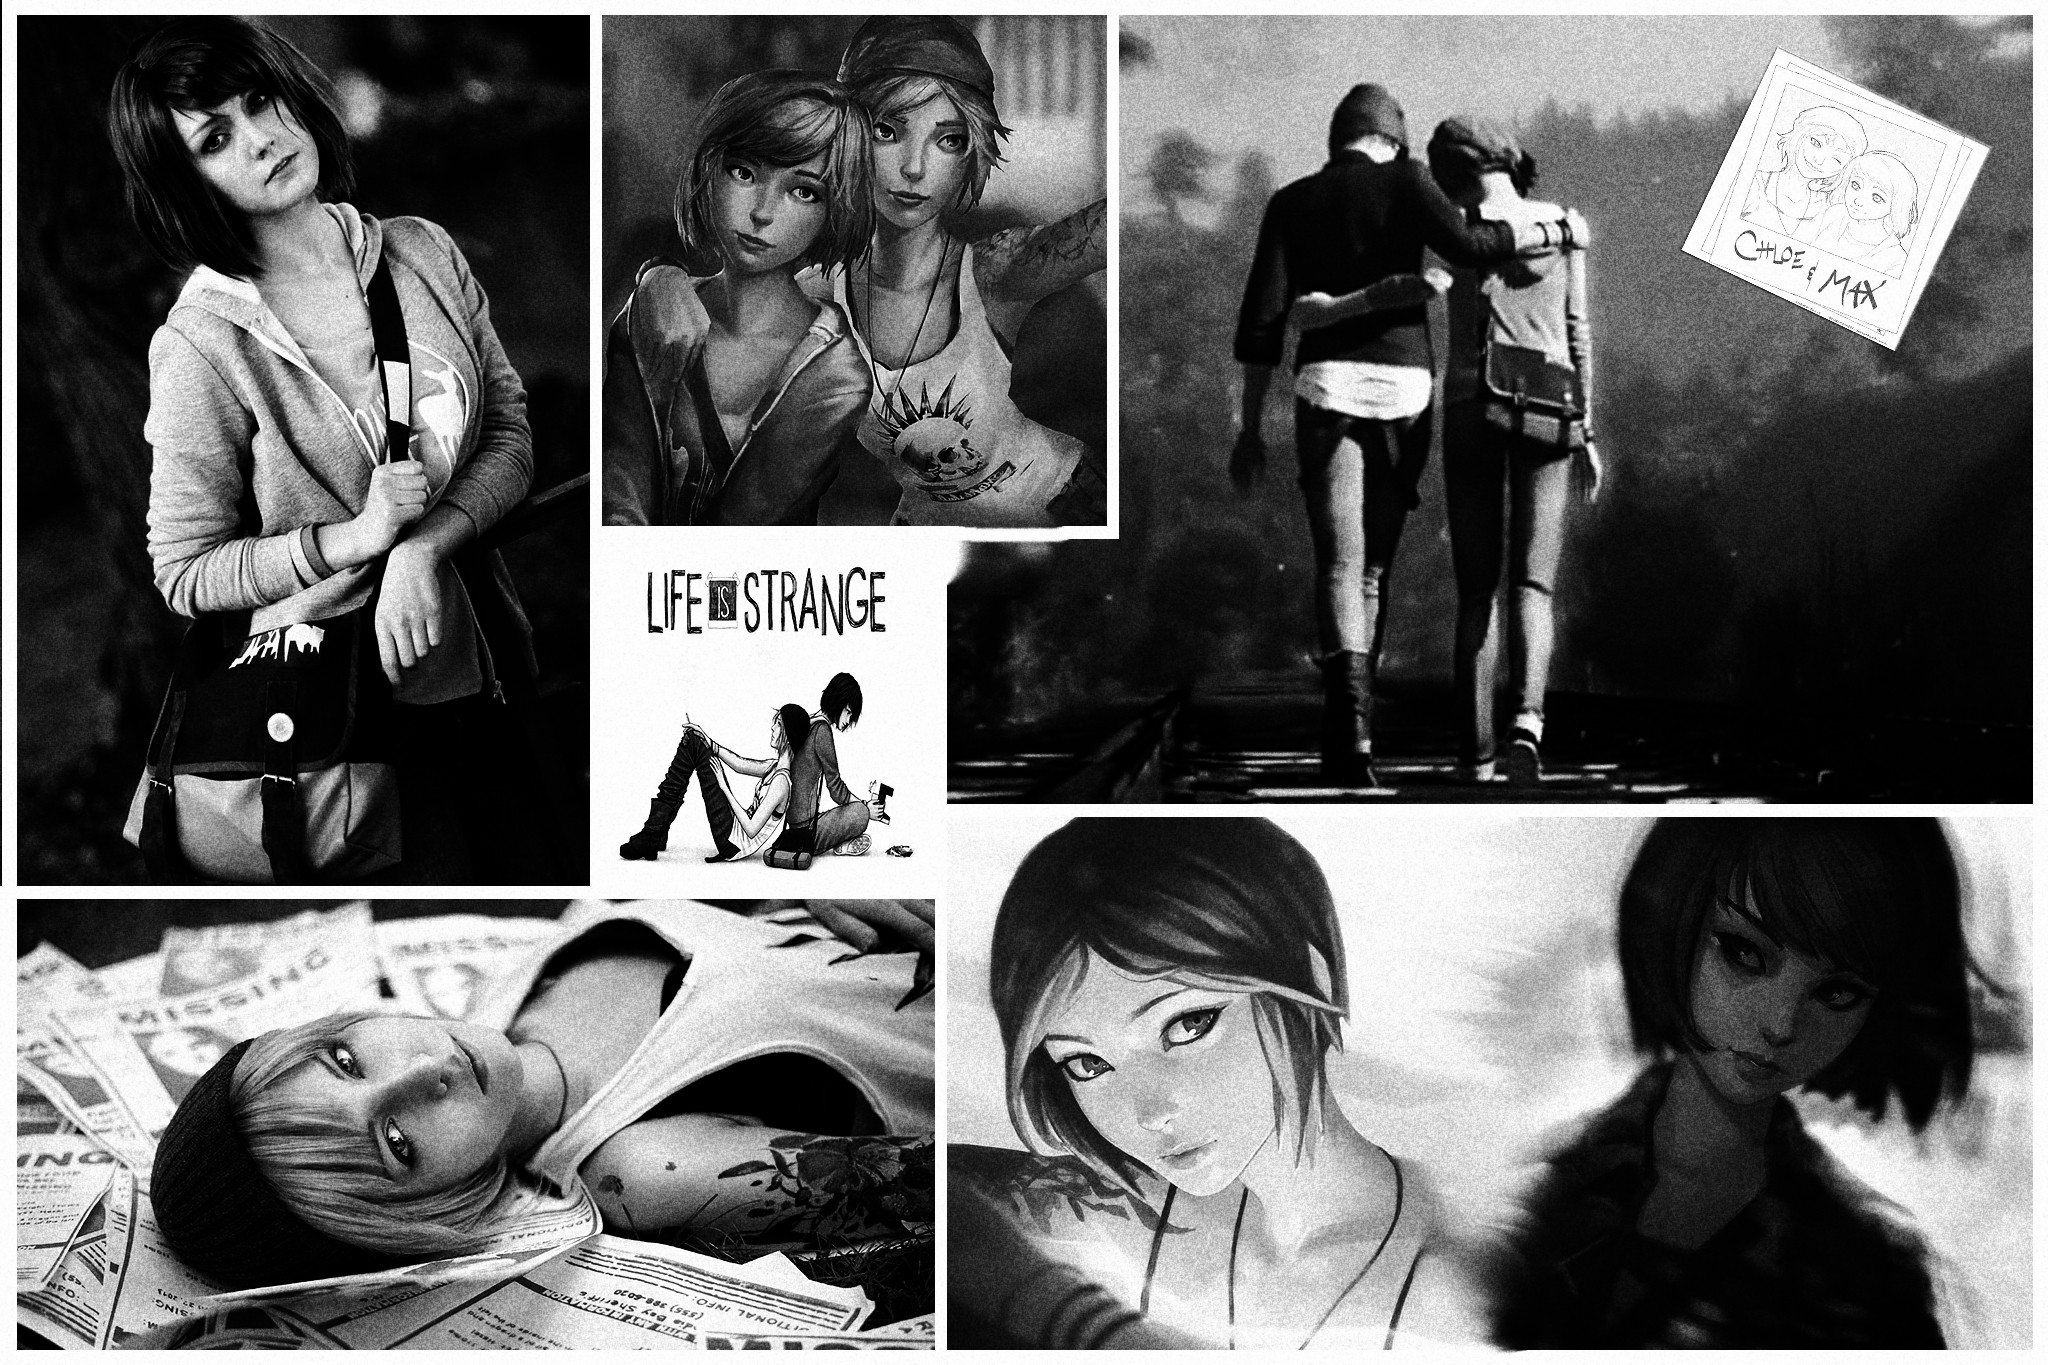 General 2048x1365 Chloe Price Max Caulfield Life Is Strange video games monochrome PC gaming collage video game girls video game characters